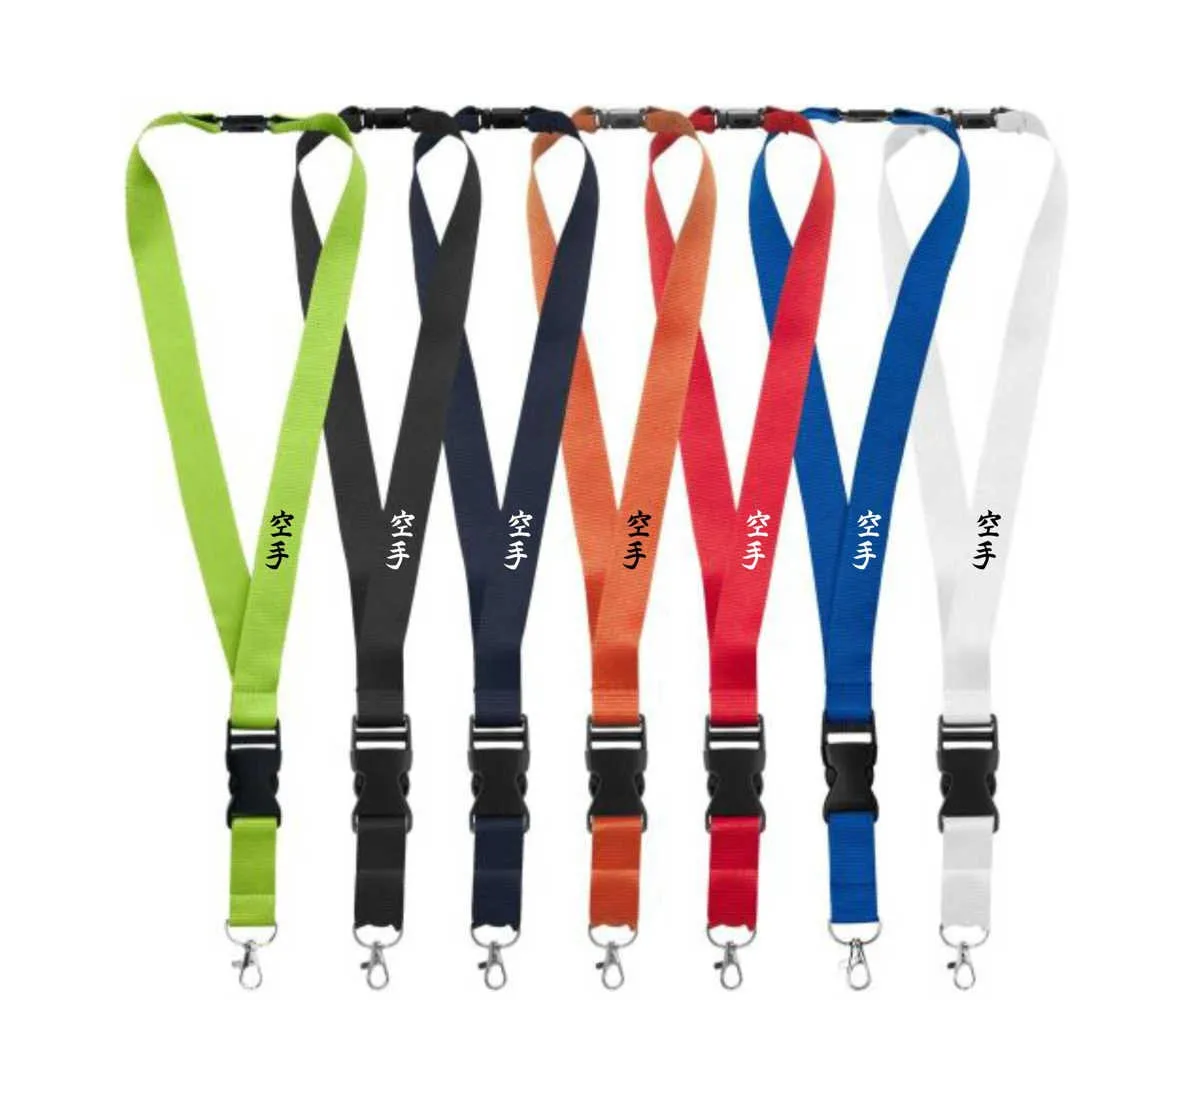 Lanyard with karate characters